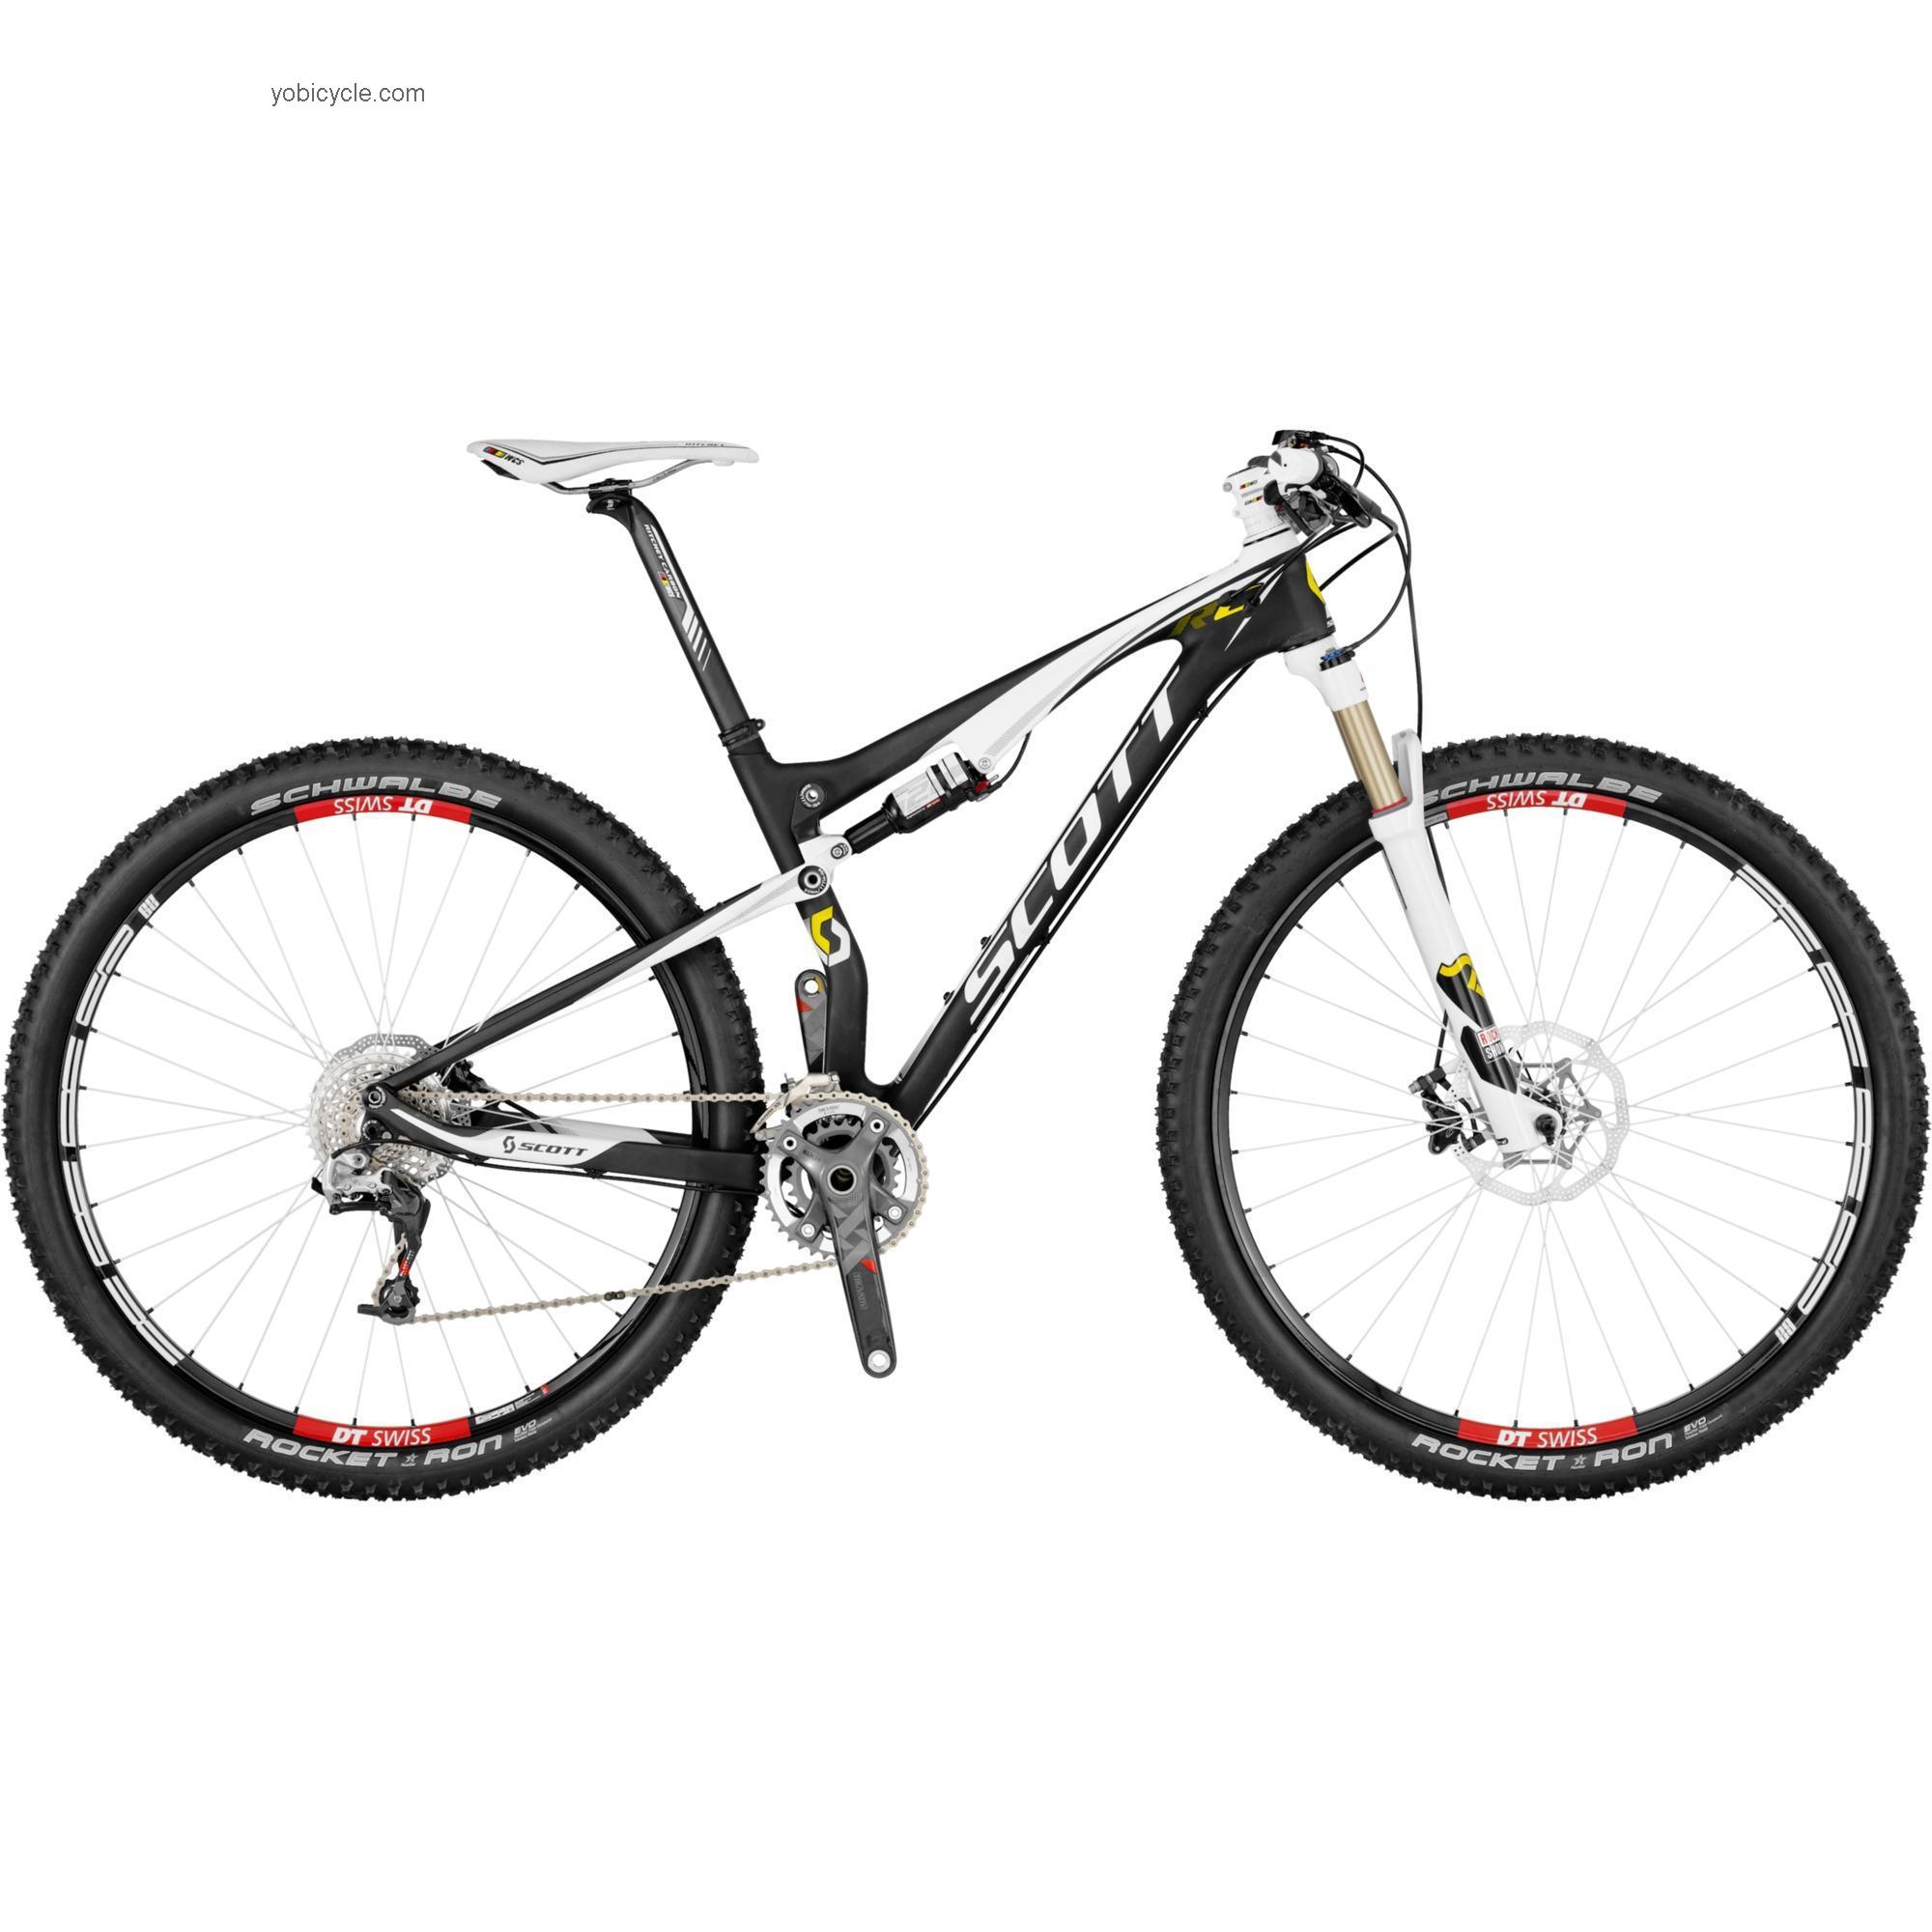 Scott Spark 29 RC competitors and comparison tool online specs and performance